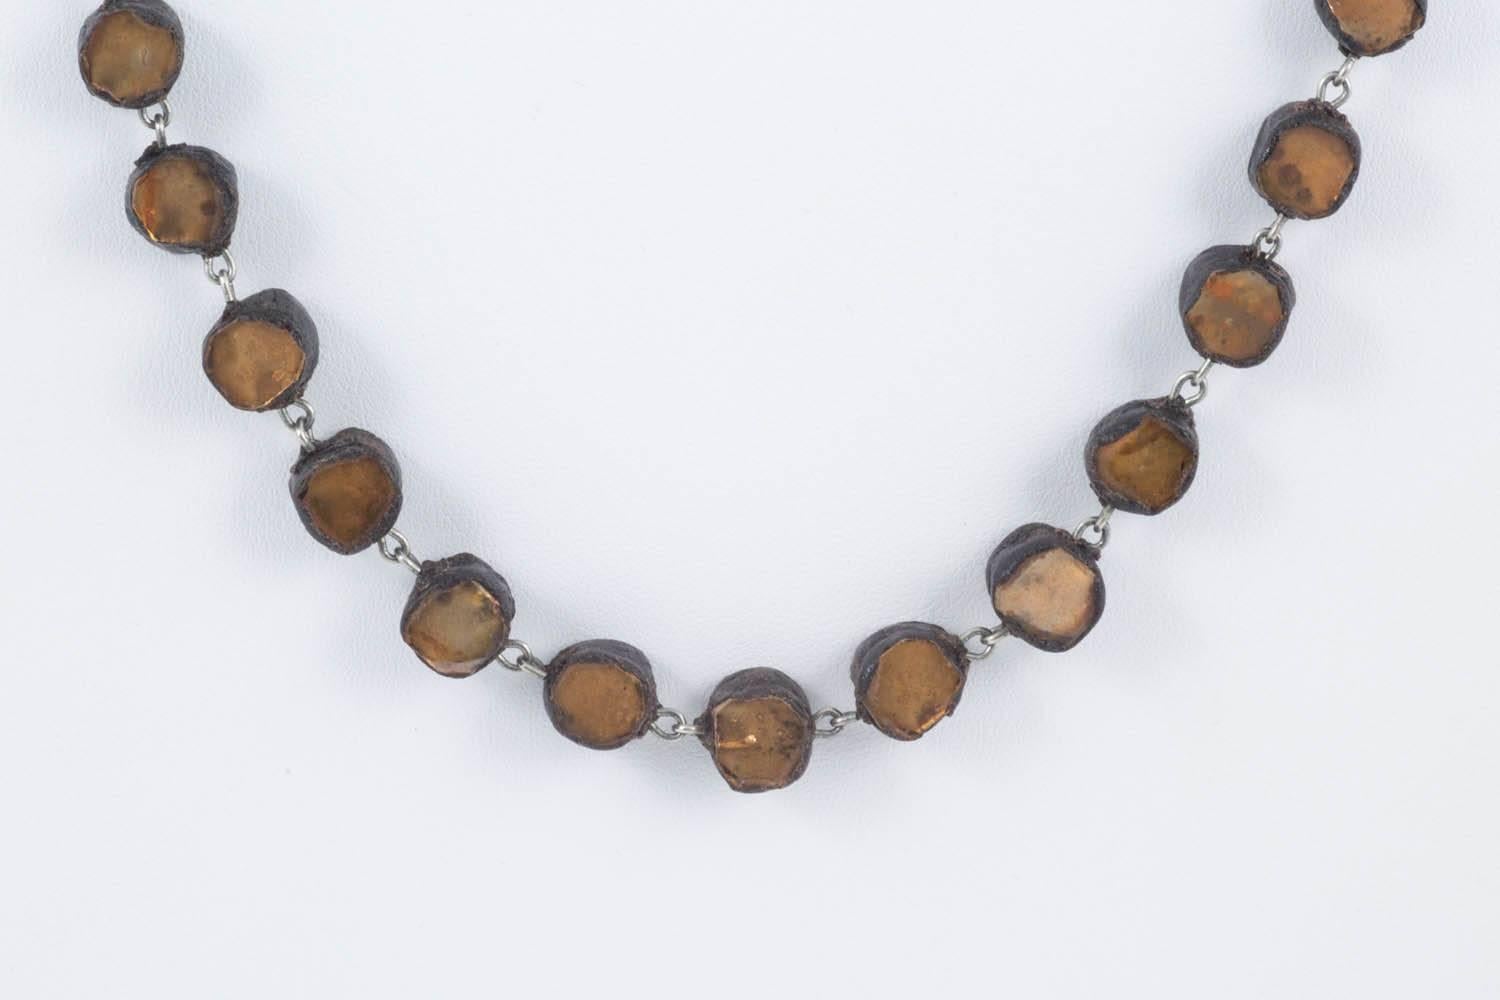 A magical single row necklace from Line Vautrin, magician and poetess of jewellery, created in the 1960s. Made from 'talousel'  (a type of resin popular in the 1960s) and fragments of golden bronze mirror, it is a classic and simple piece, an easy